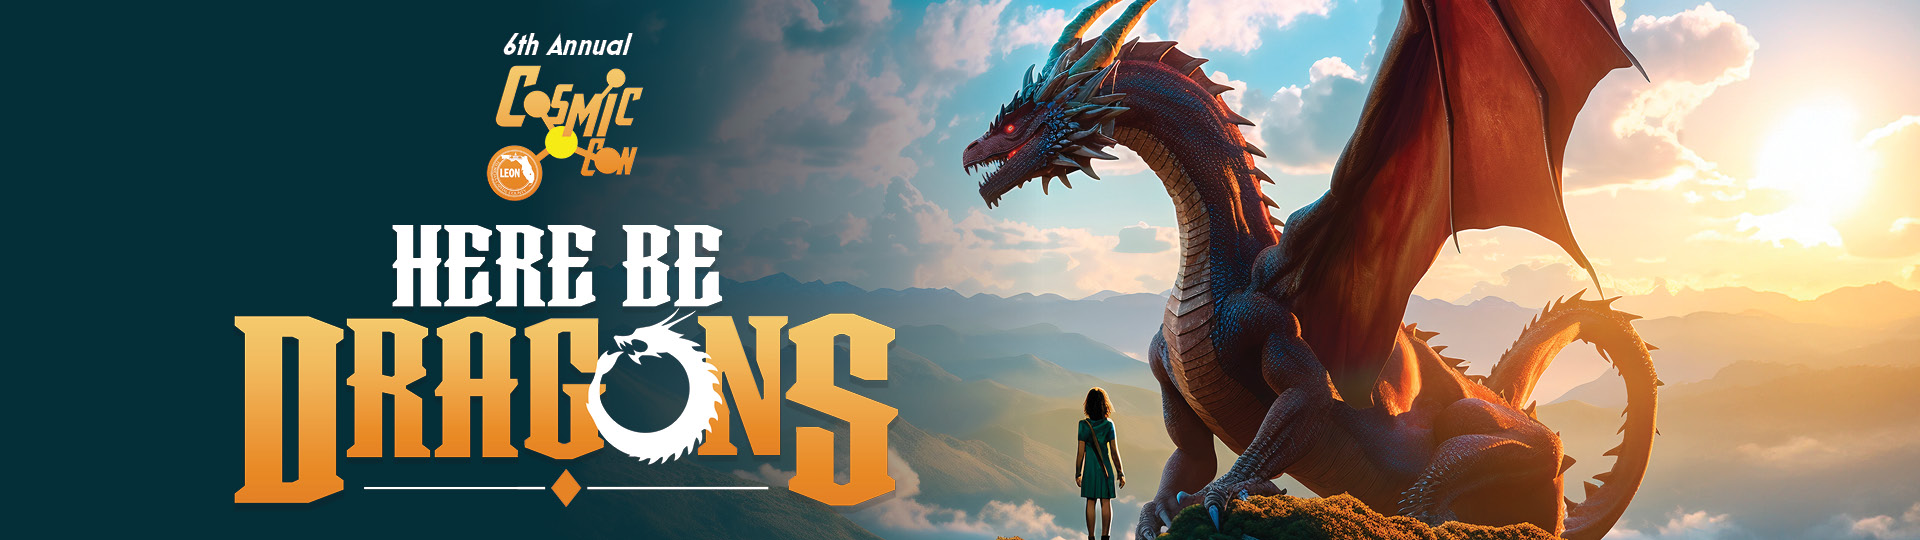 A red dragon stands atop a mountain with a young woman. The two are surrounded by a sunlit sky and the words "Here Be Dragons."